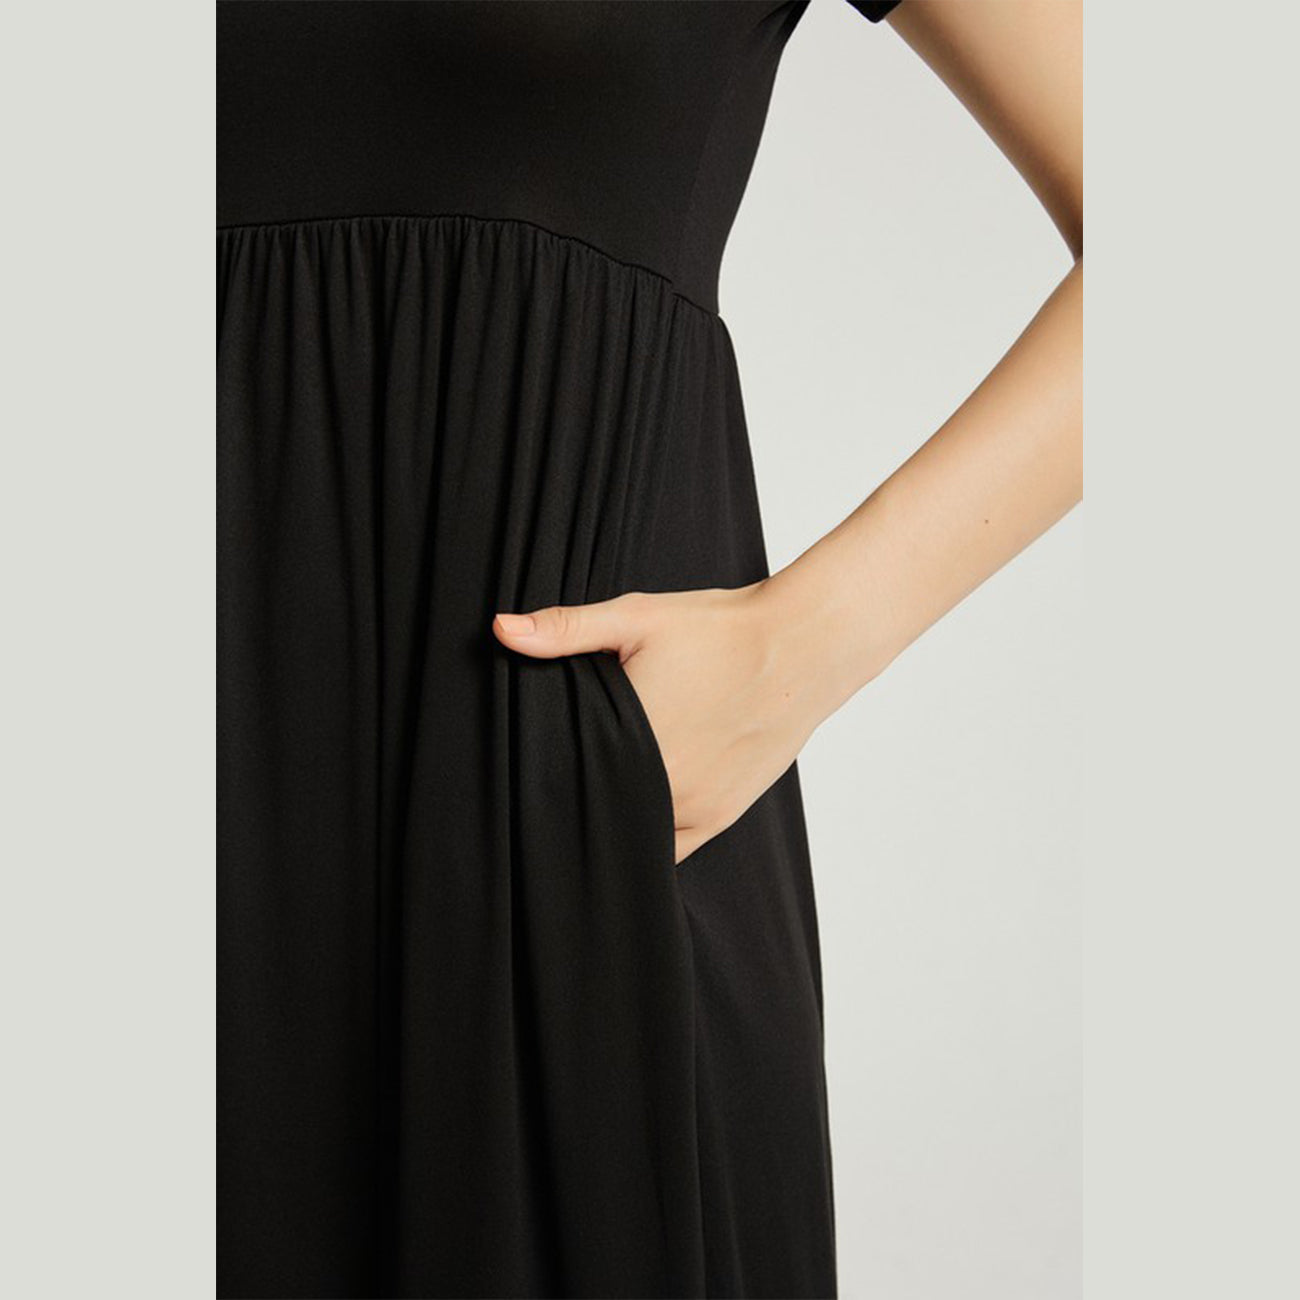 Women's Summer Casual Maxi Dress With Pocket- Black